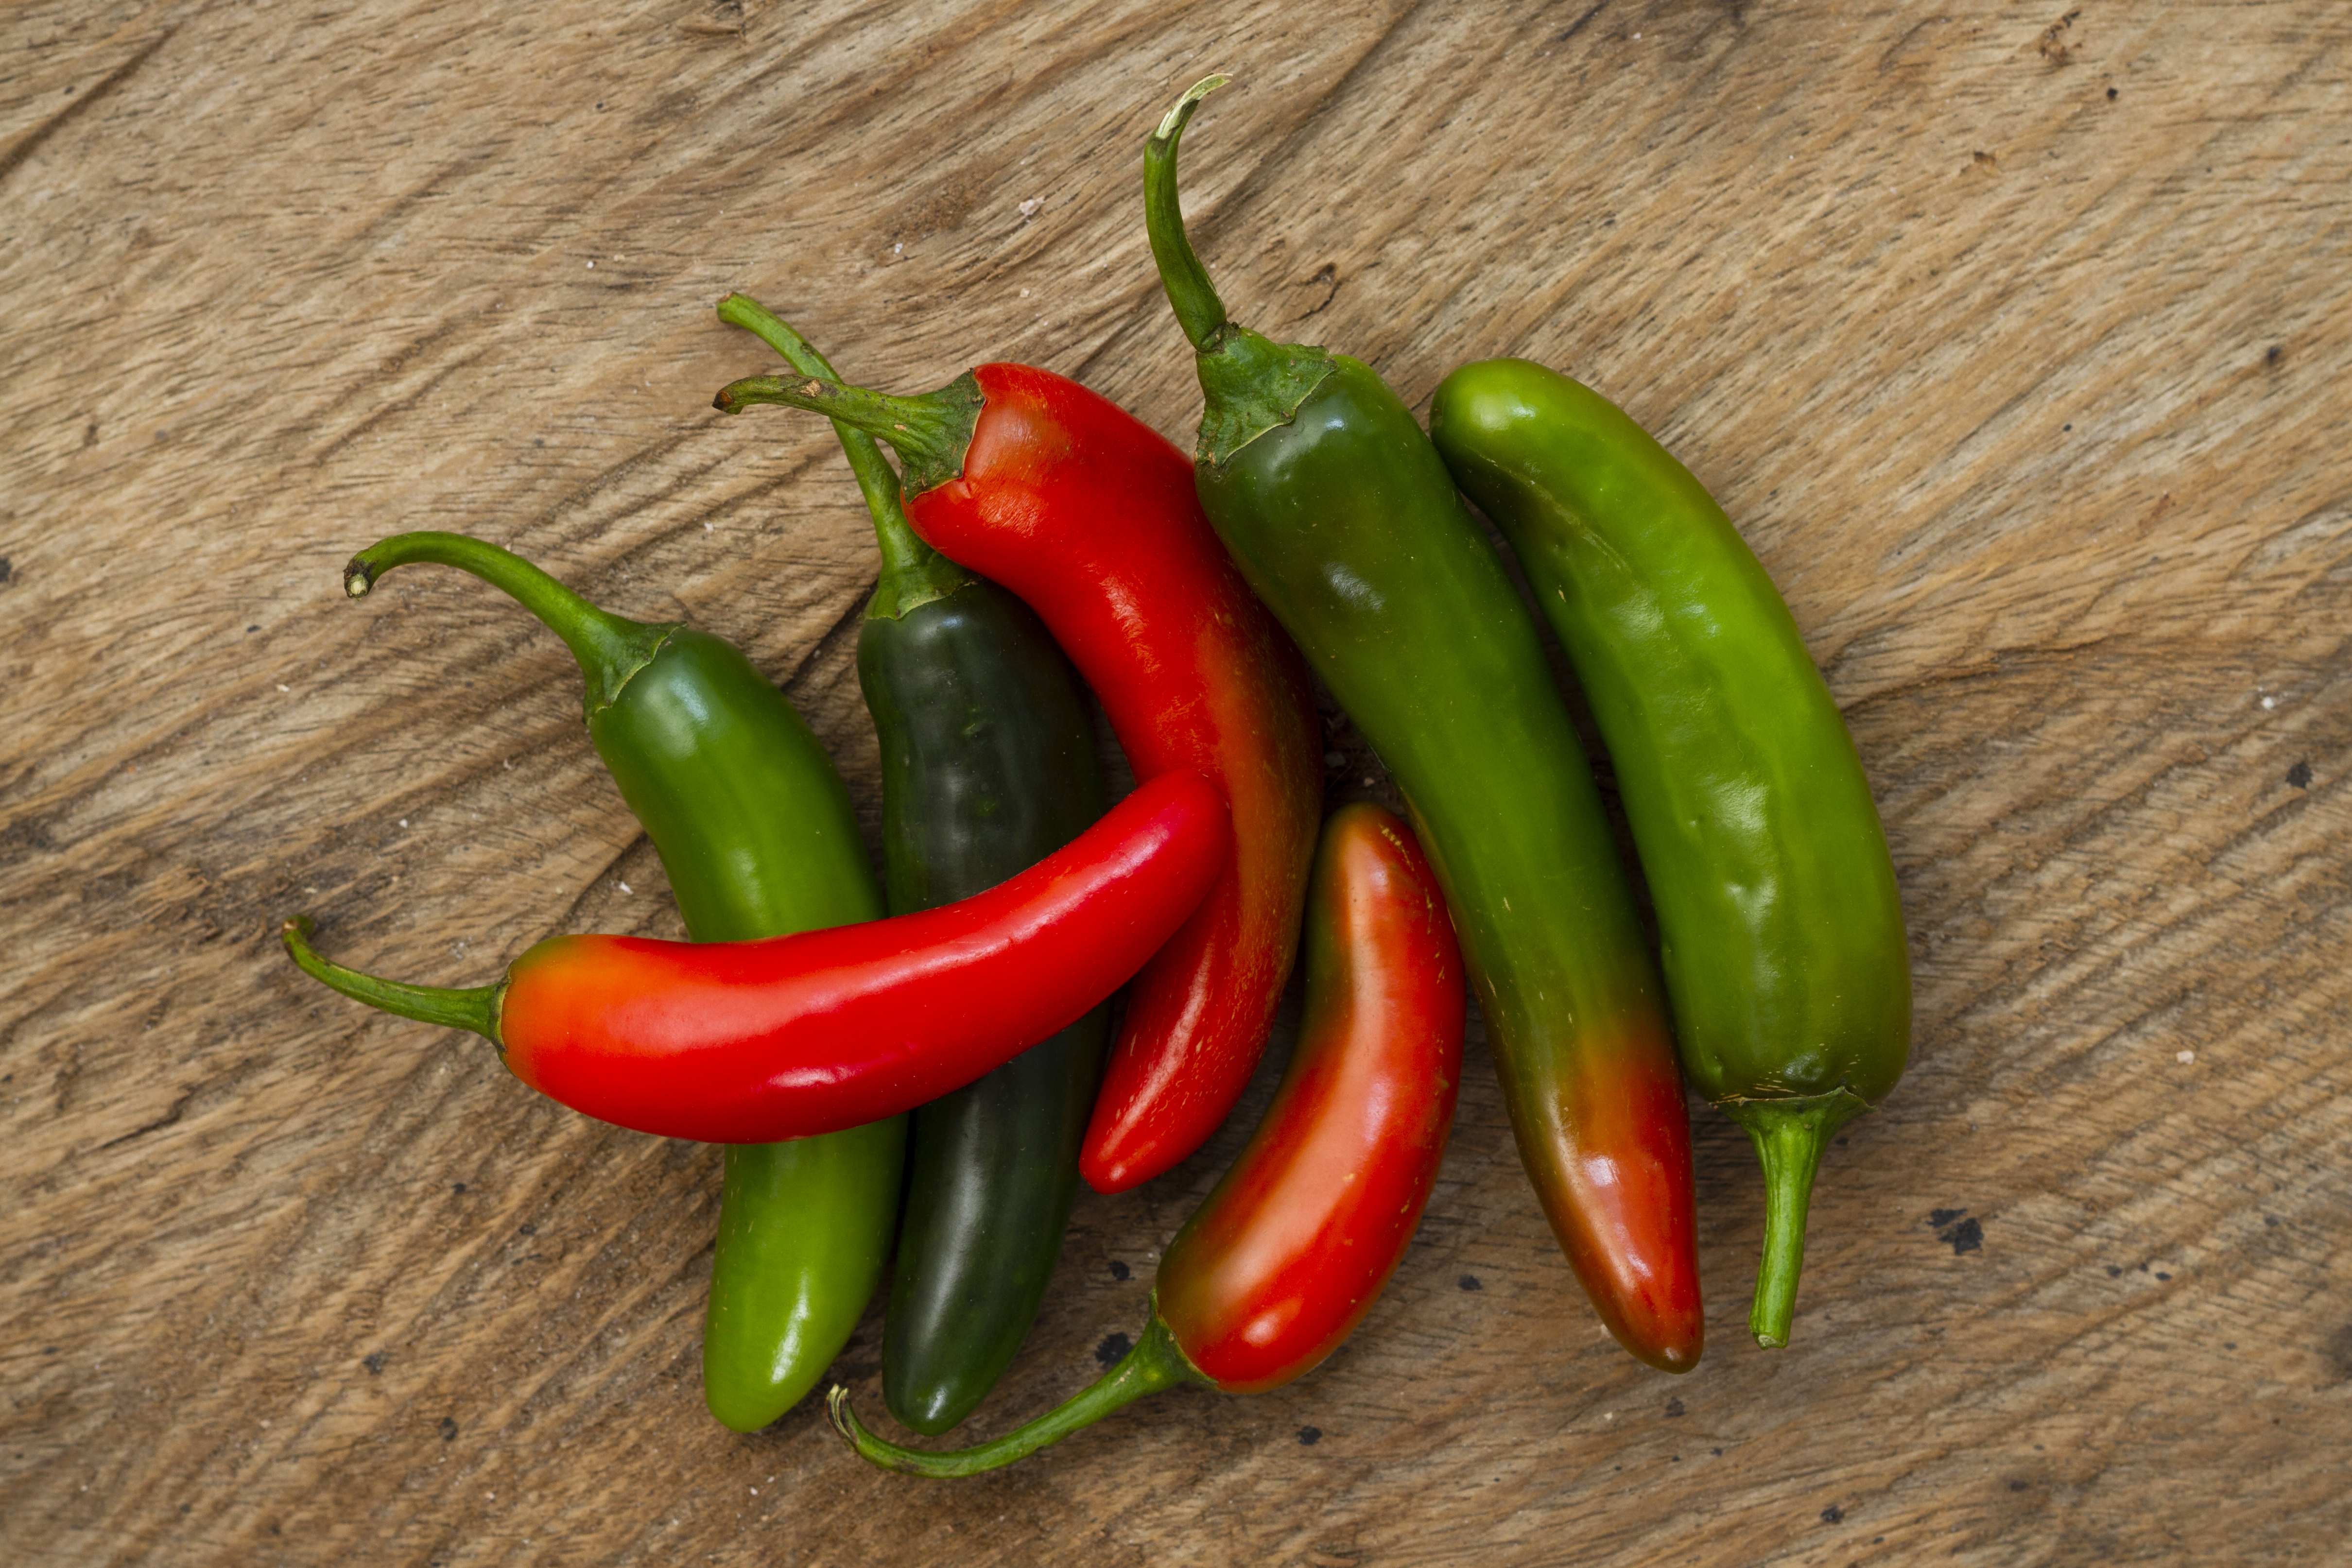 Green and red serrano peppers on a wooden background